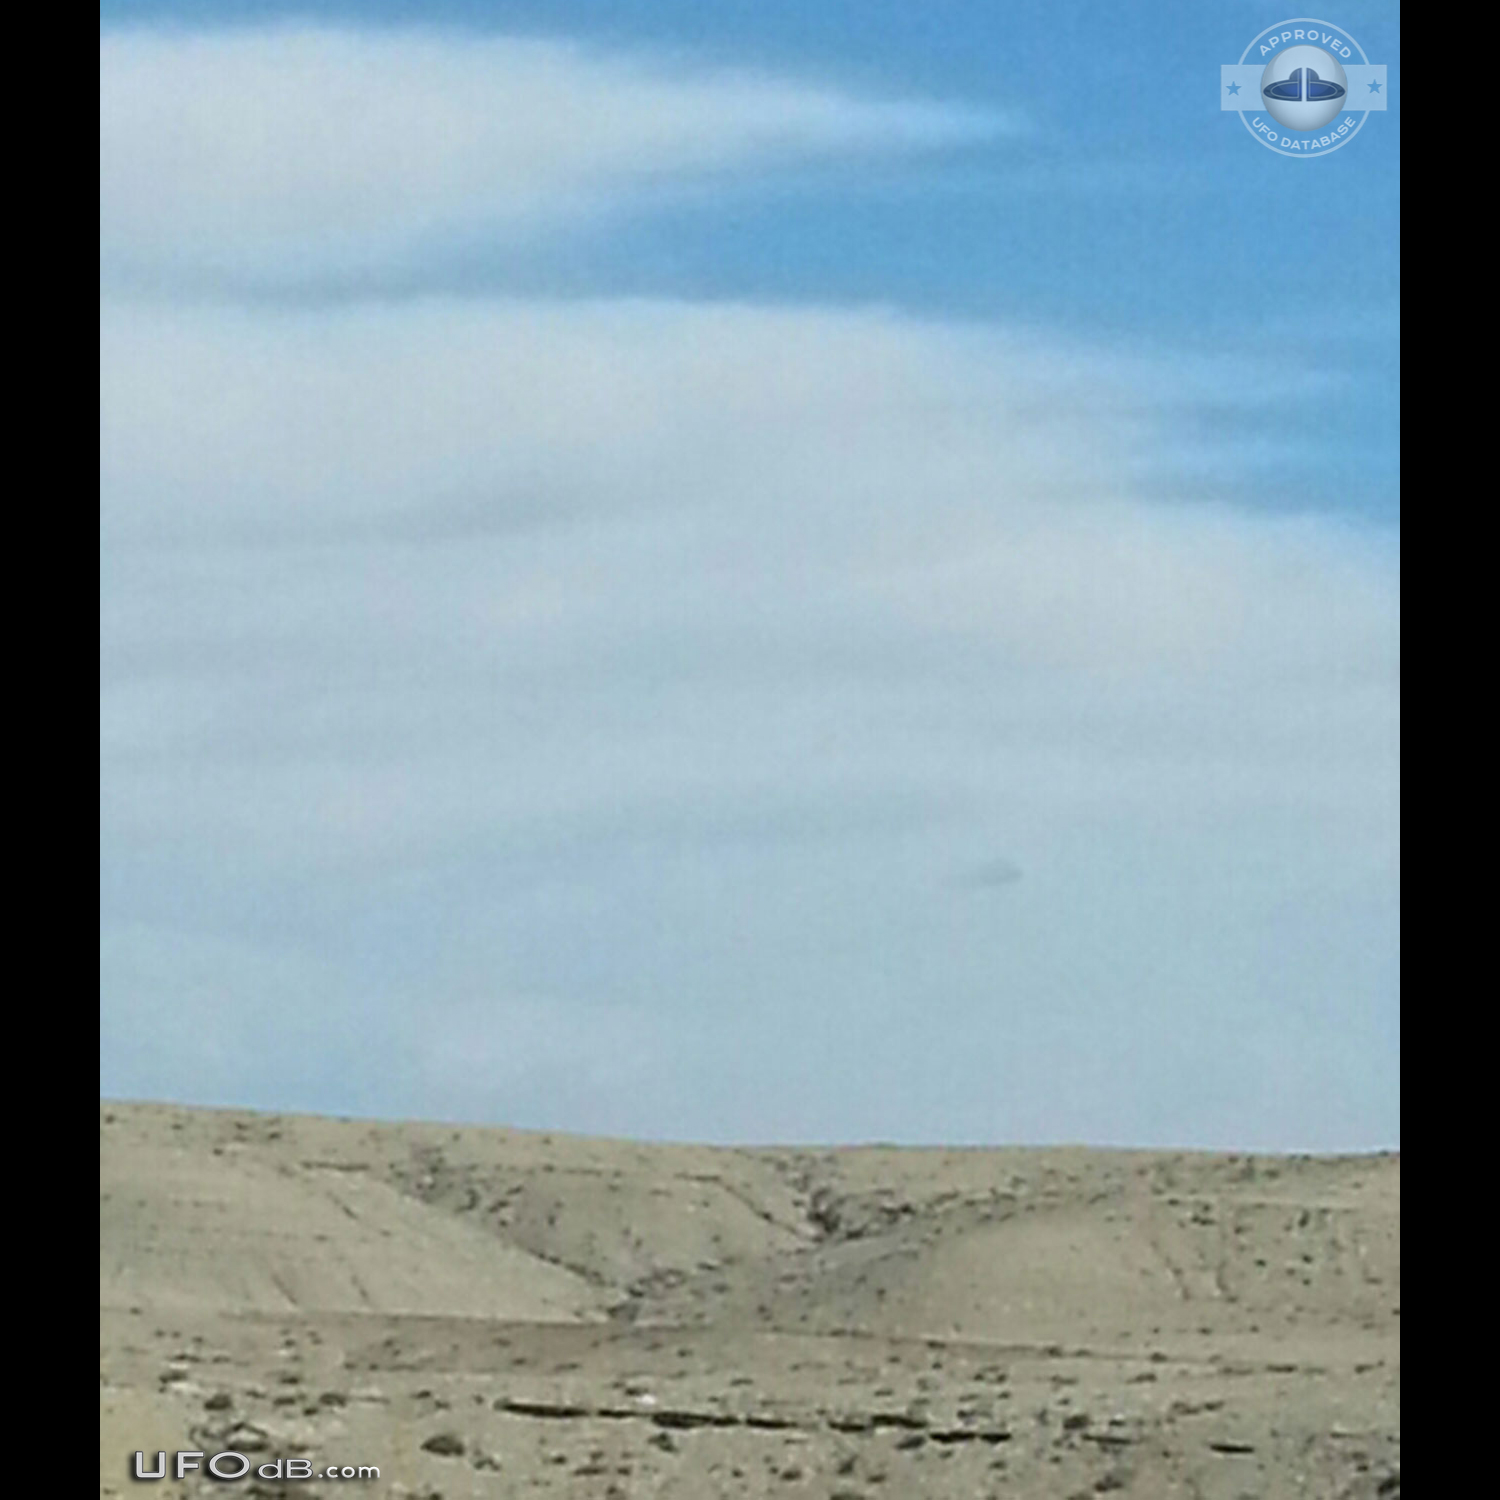 Cigar shaped UFO hiding in out of clouds in Farmington New Mexico USA UFO Picture #625-1